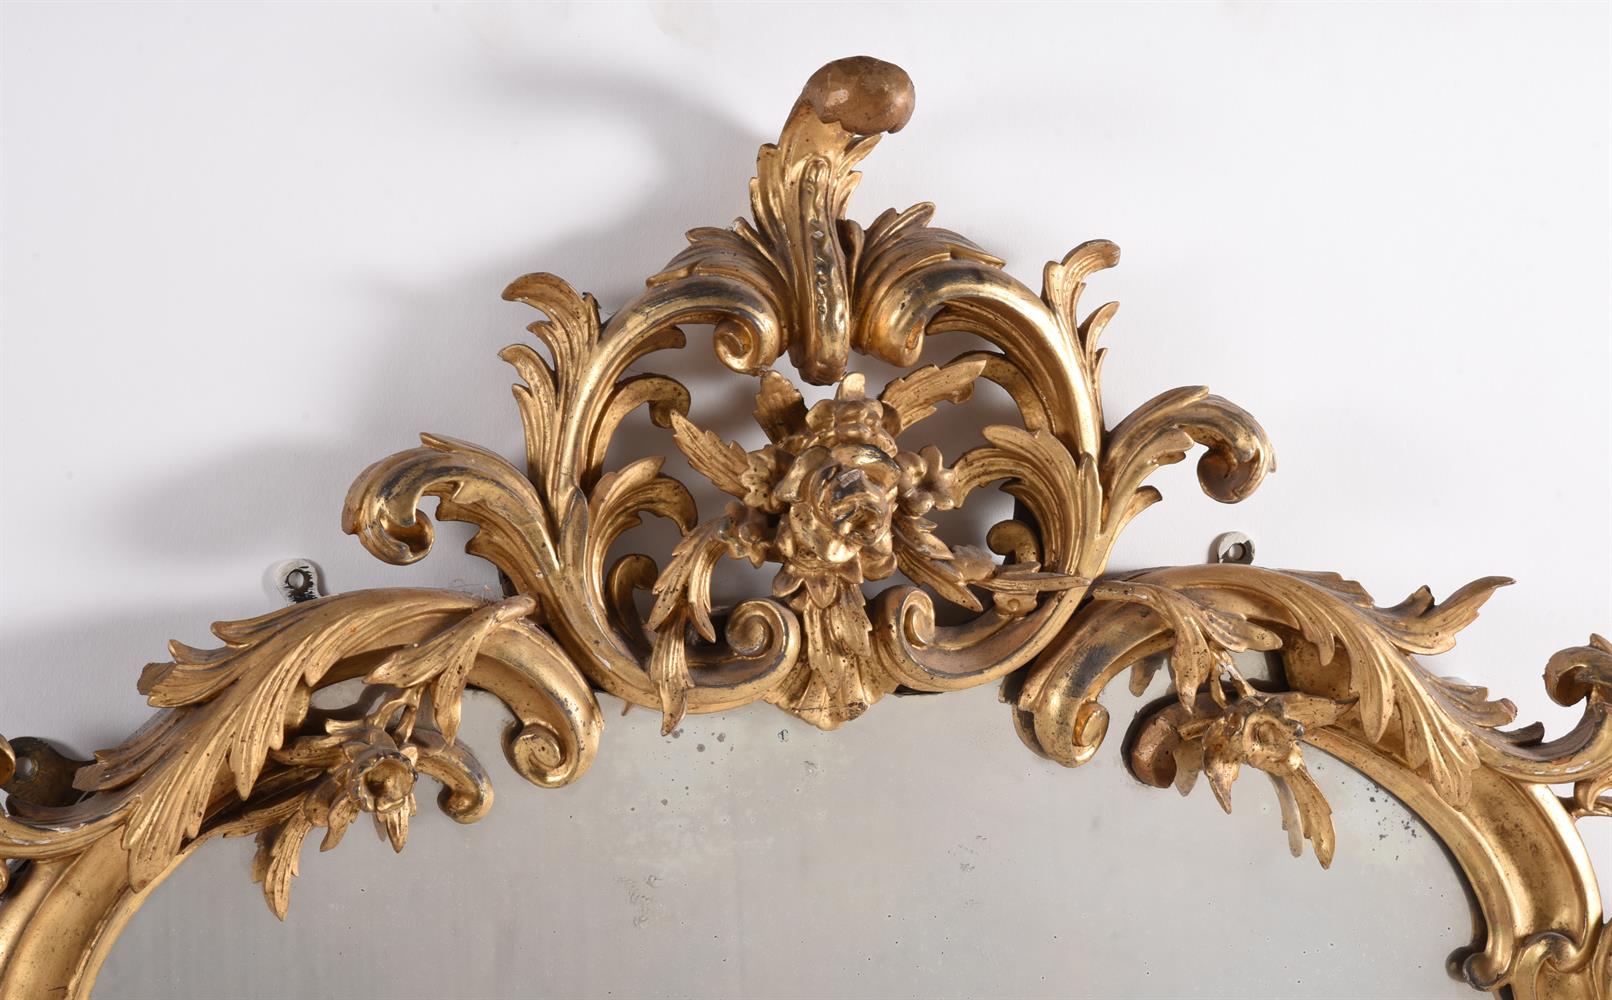 A GILTWOOD OVERMANTEL MIRRORIN MID 18TH CENTURY ROCOCO STYLE - Image 2 of 5